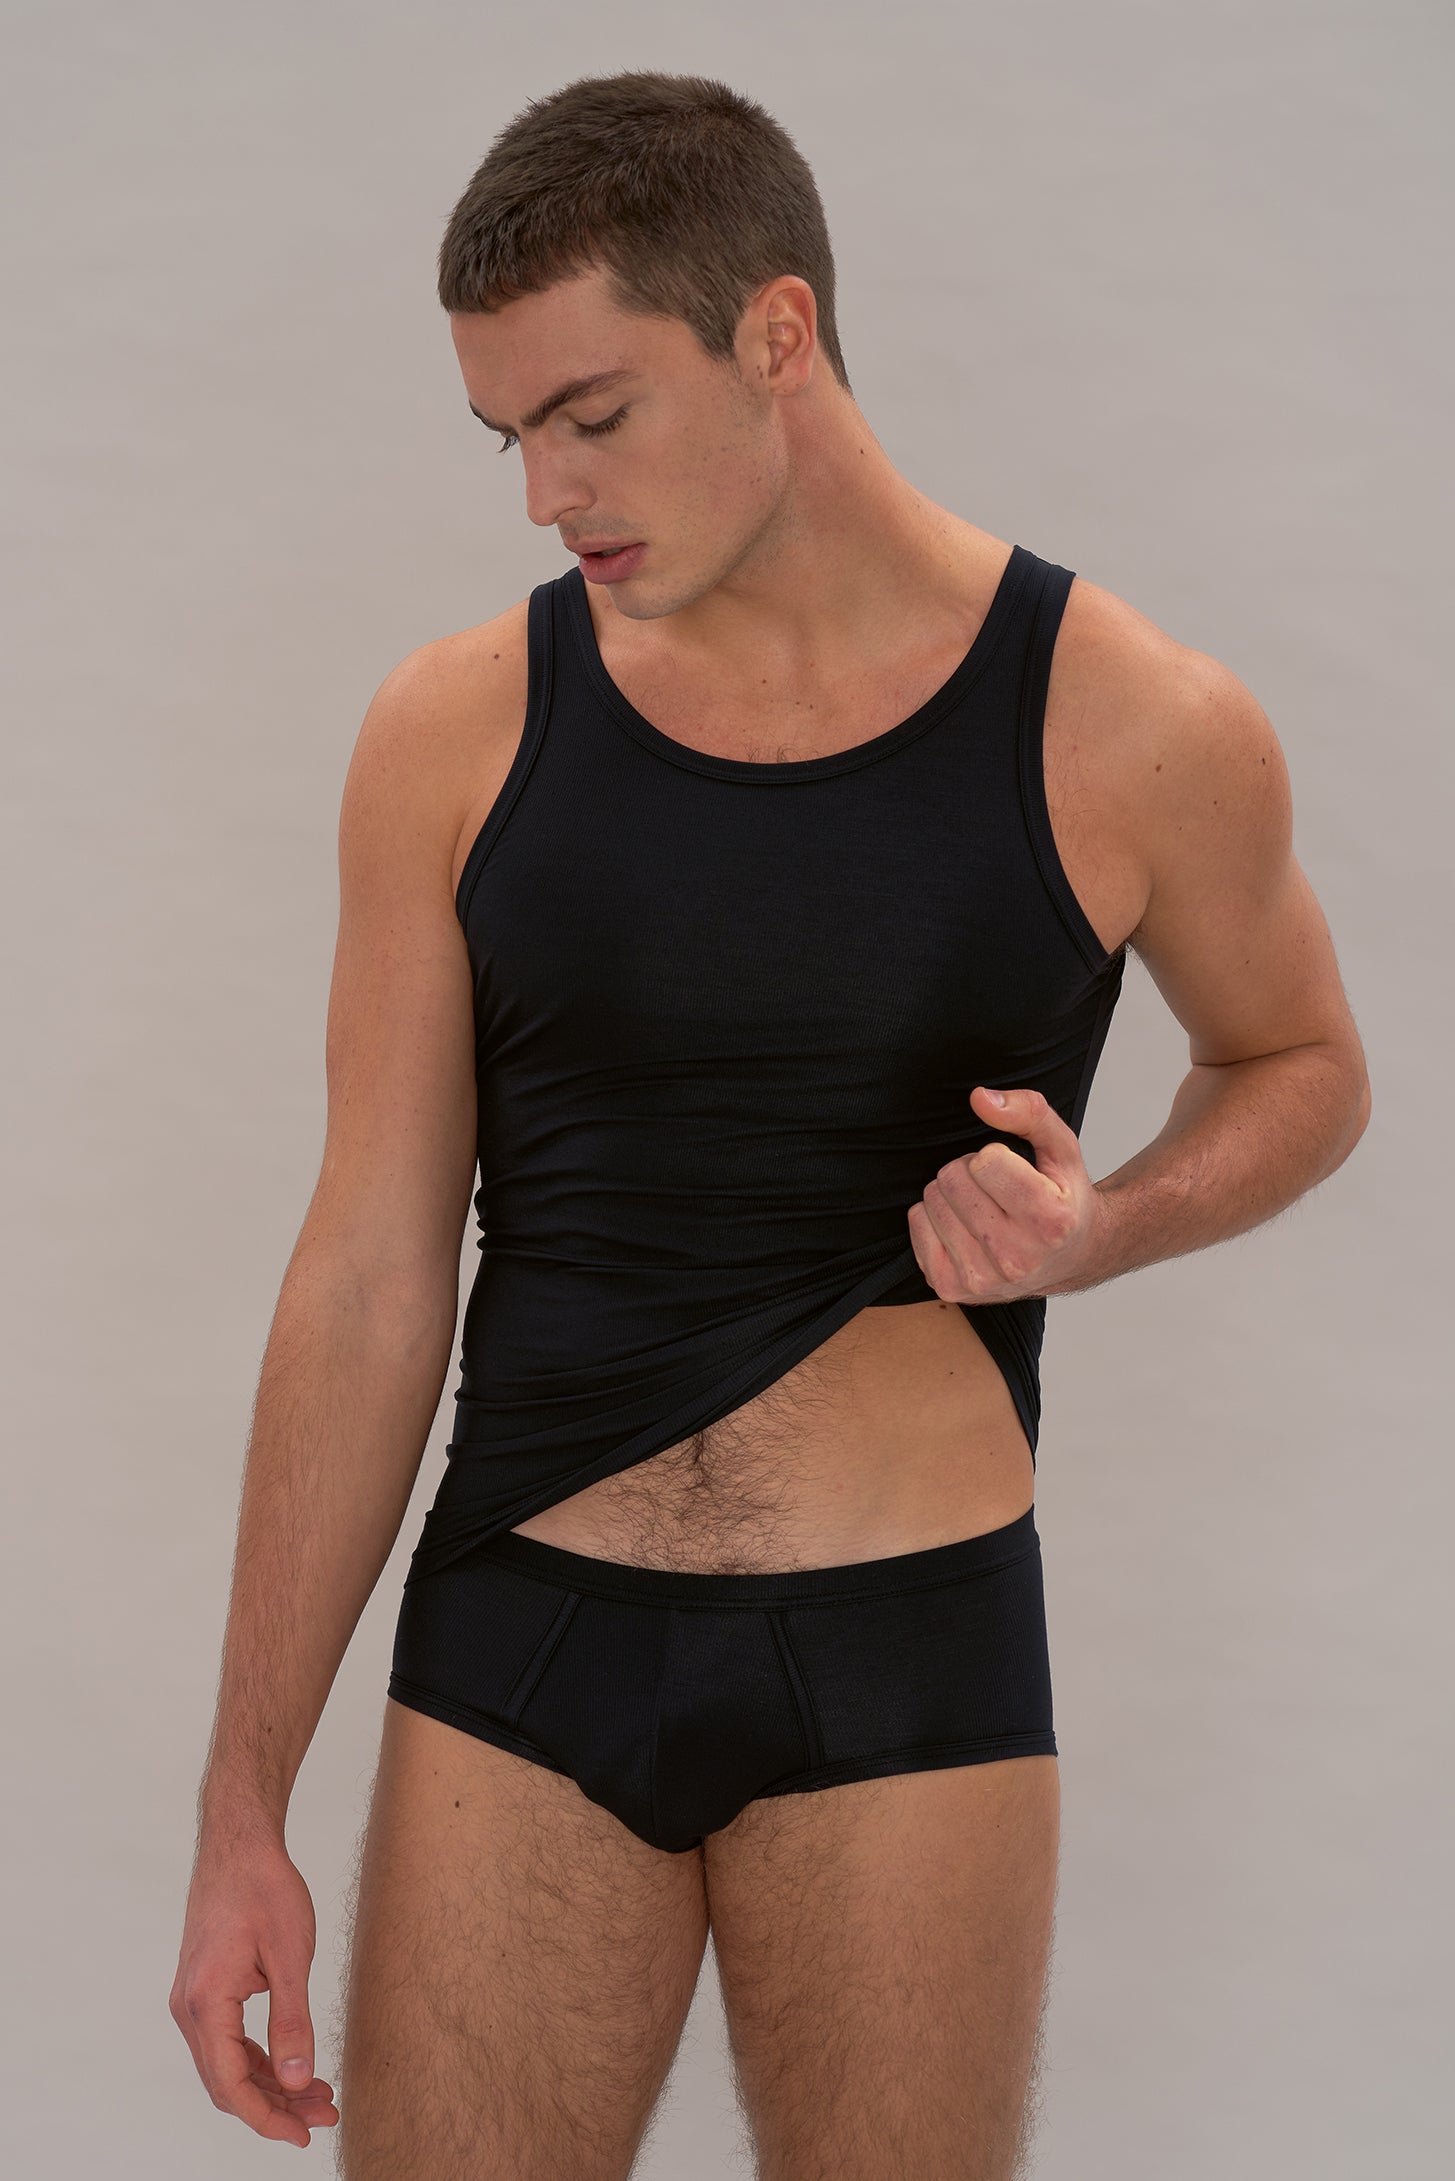 Tank top / undershirt in black made from natural MicroModal from moi-basics